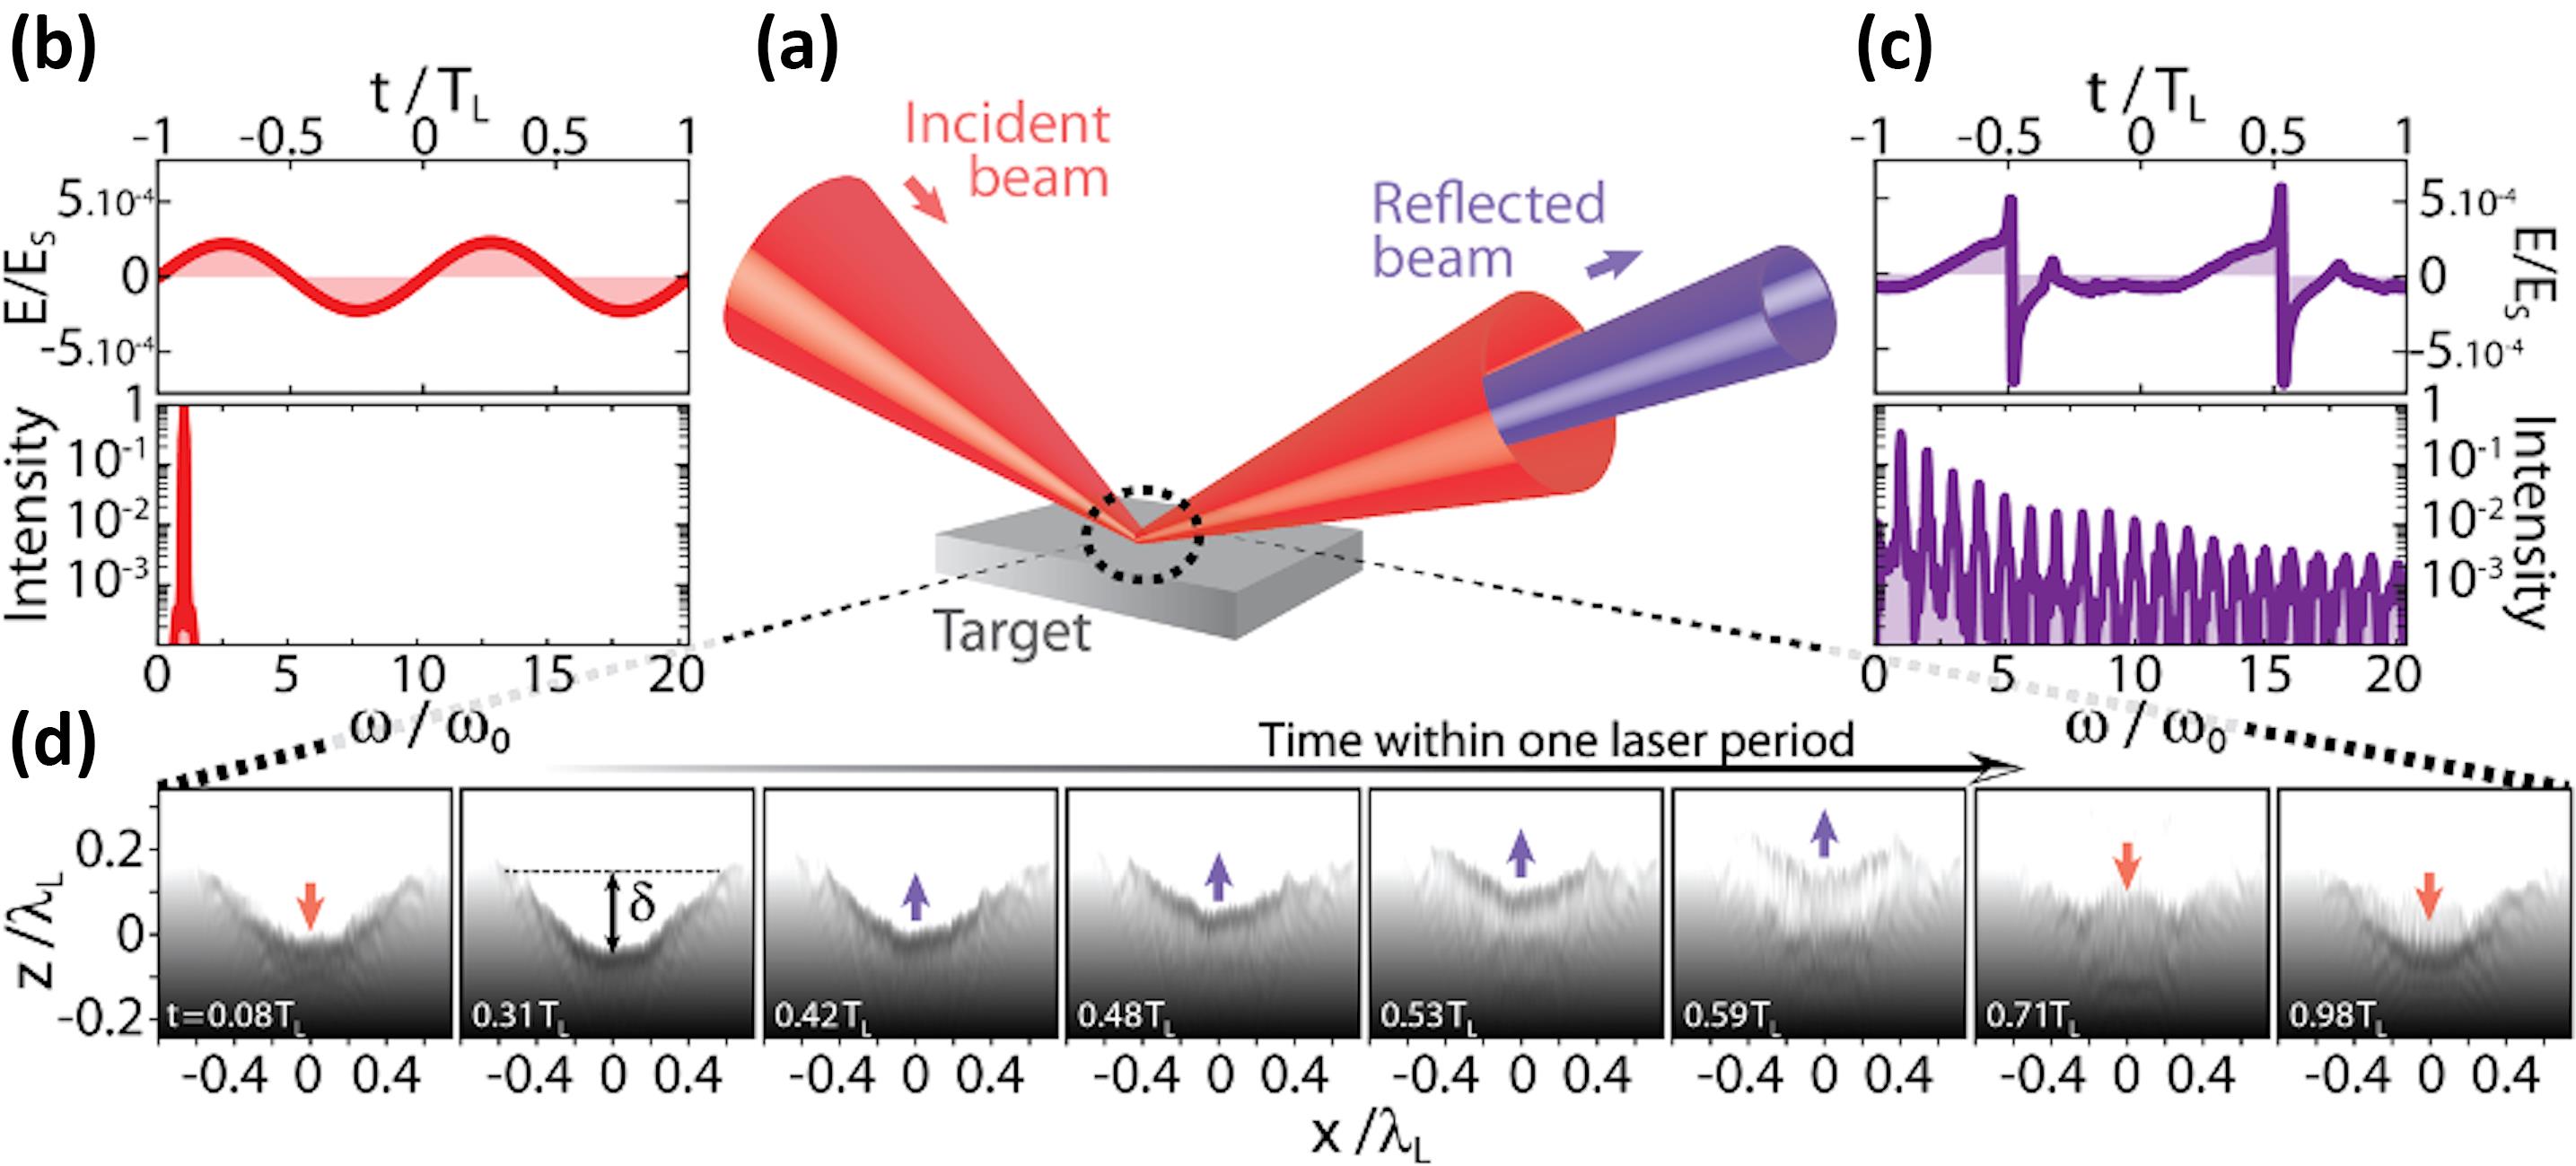 Physics of plasma mirrors. (a) Plasma mirrors specularly reflect an incident ultraintense laser beam. At ultrahigh intensities, this laser field ((b), field E(t) in the upper graph, spectrum in the lower graph) drives a periodic relativistic oscillation of the plasma surface. This induces a Doppler effect on the reflected beam, resulting in a periodically distorted reflected waveform ((c), upper graph), the spectrum of which consists of a comb of high-order harmonics ((c), lower graph). (d) Snapshots of the electron density at the plasma mirror surface (in a Lorentz-boosted frame where the laser is normally incident on the plasma), at different times in a laser optical cycle (see white labels), revealing two key effects: first, the relativistic oscillation of the plasma surface; second, the spatial curvature of this surface induced by the radiation pressure of the incident laser field. From a PIC simulation with a laser intensity I = 1022 W/cm2.